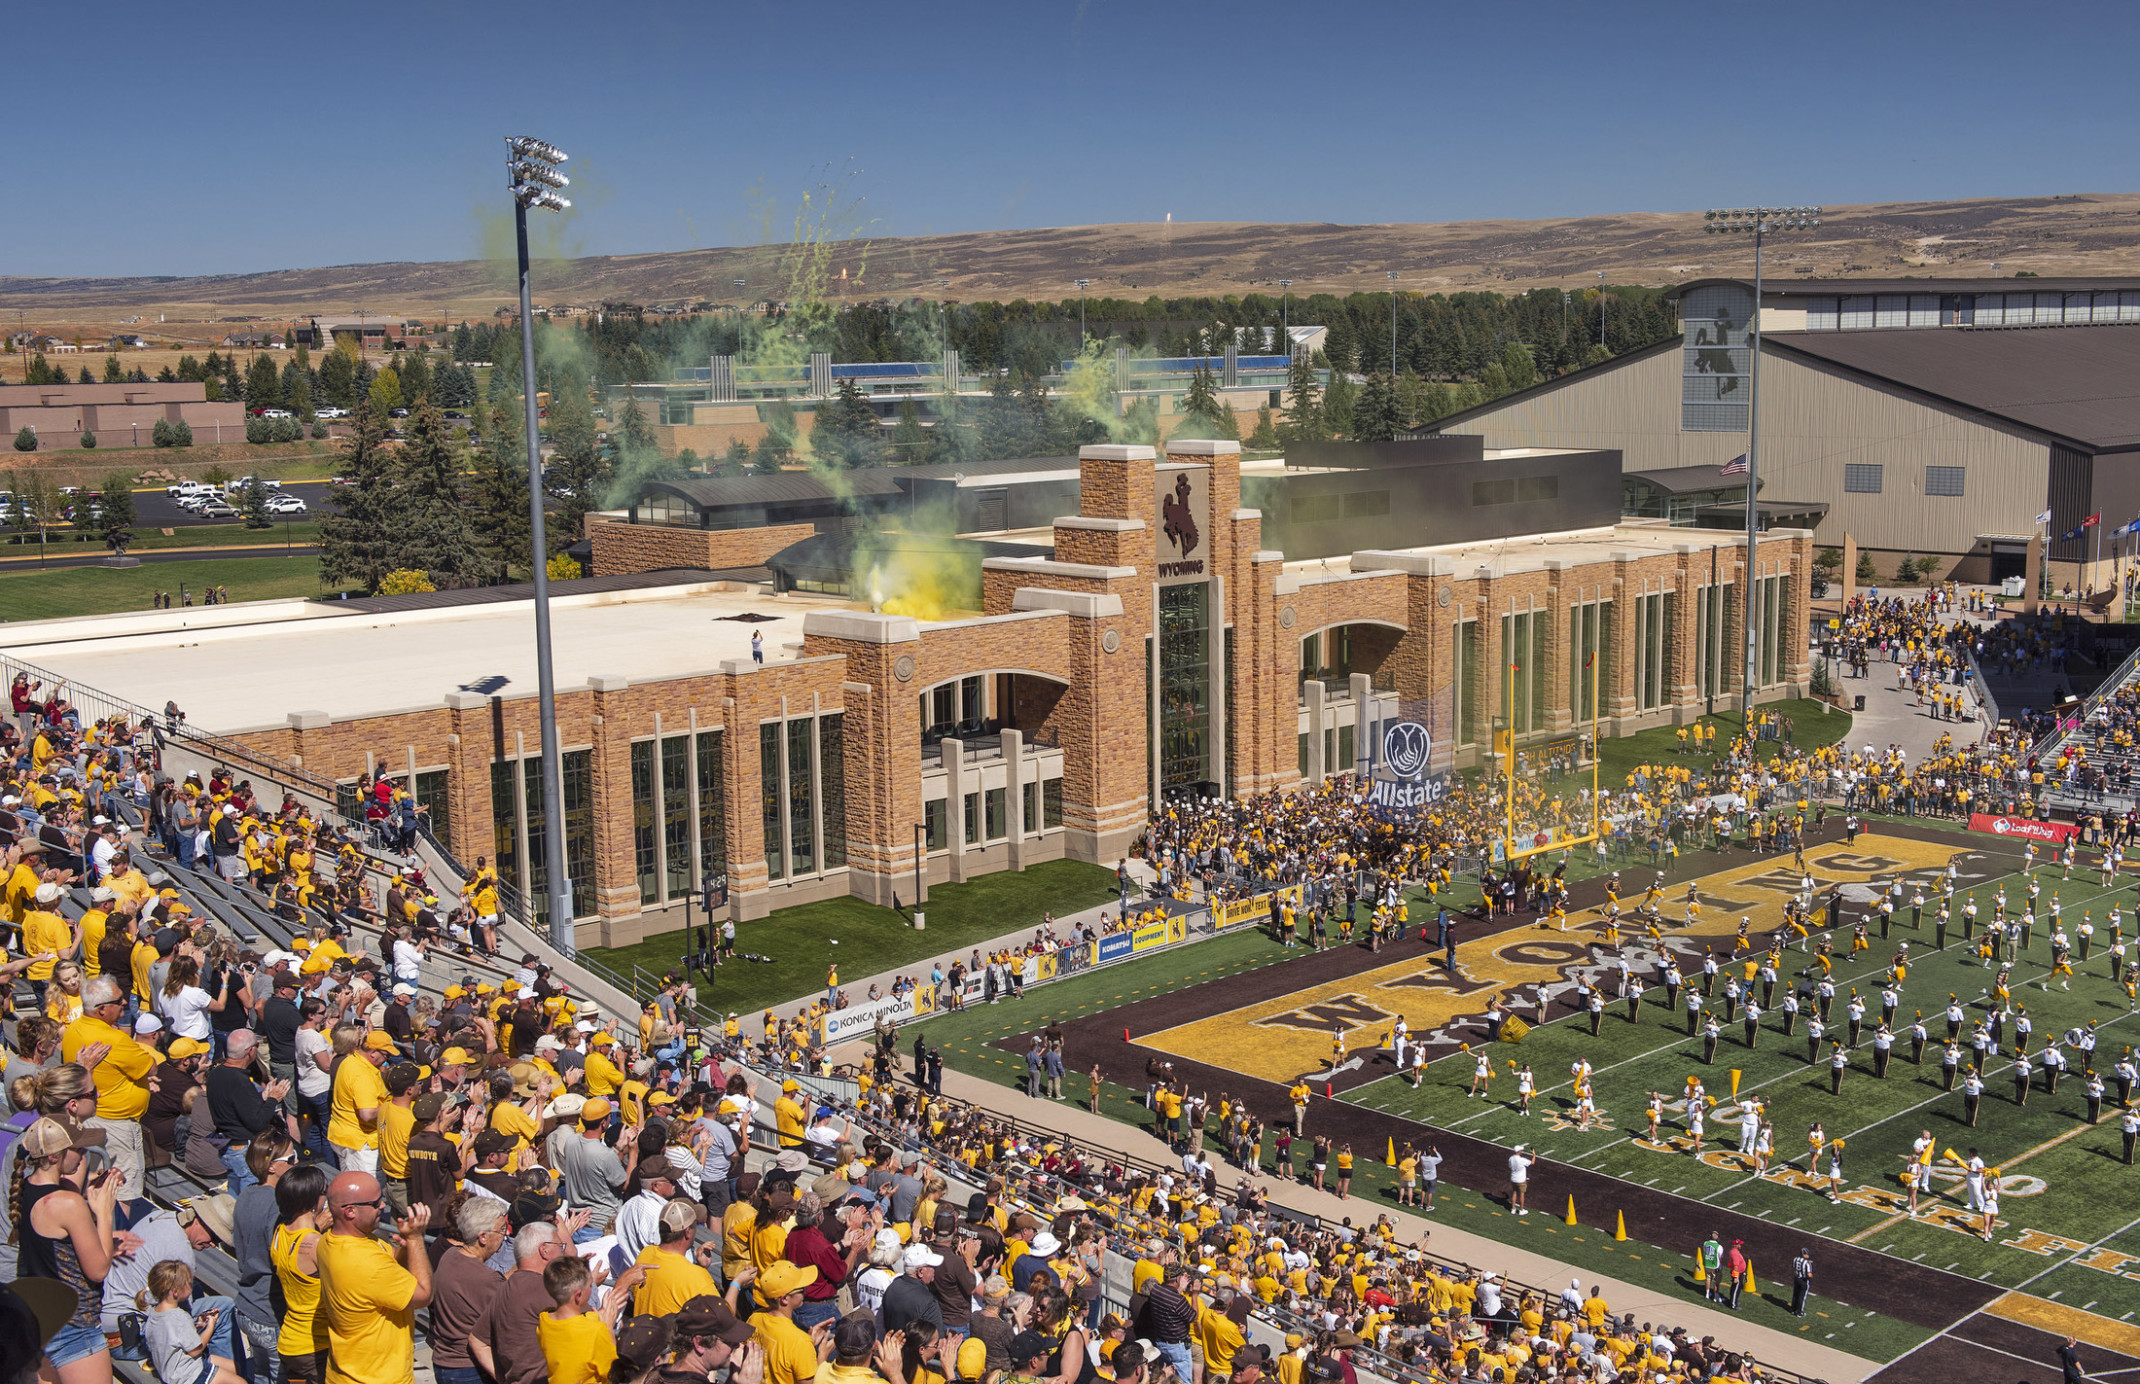 High Altitude Performance Center at the University of Wyoming seen from stands looking to stone building with yellow smoke